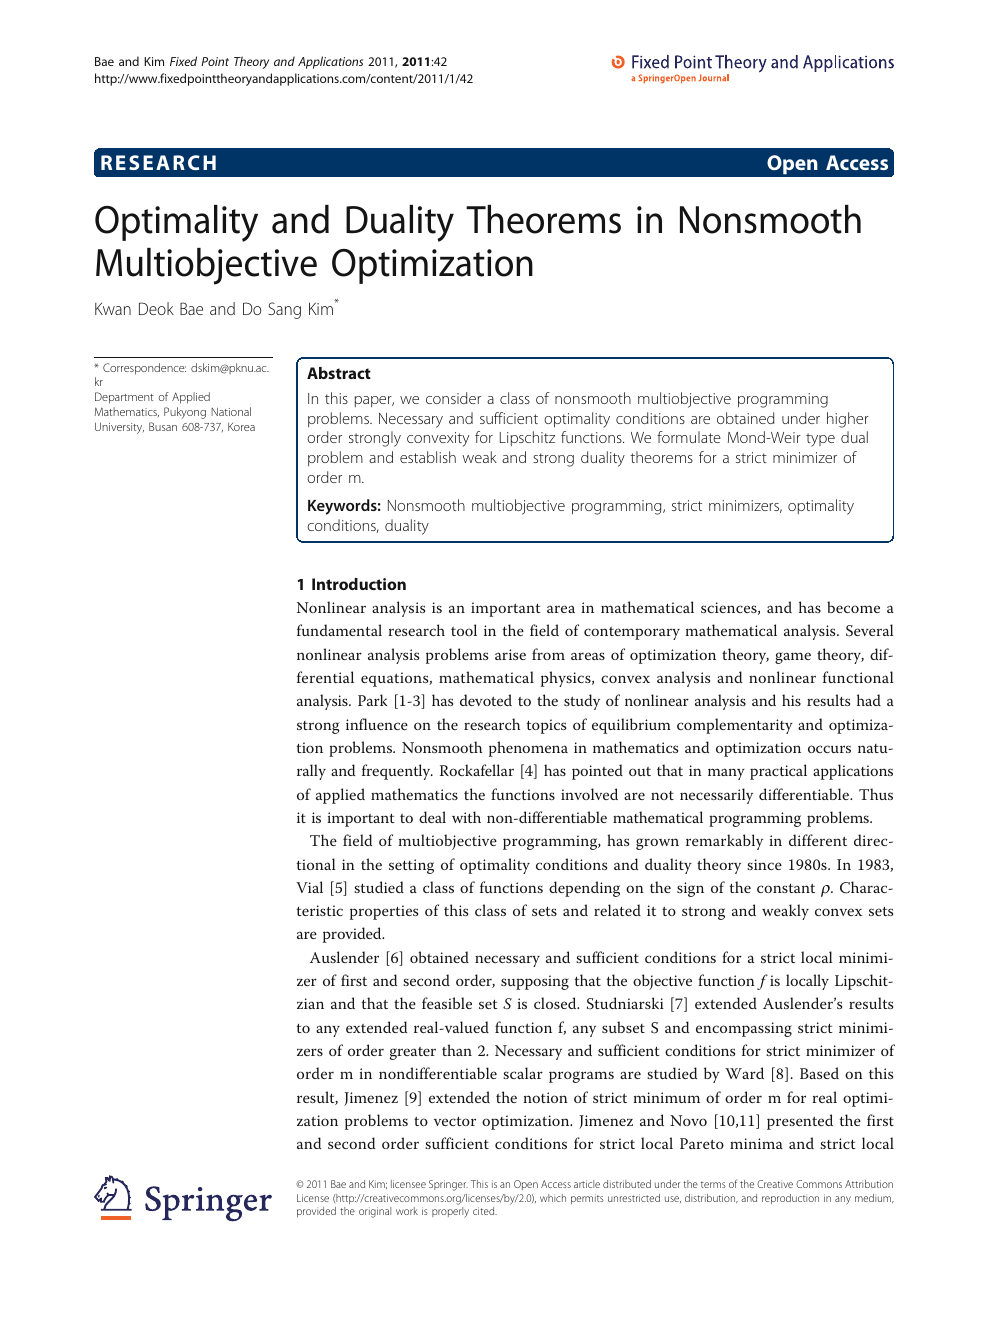 Theory of Duality in Mathematical Programming